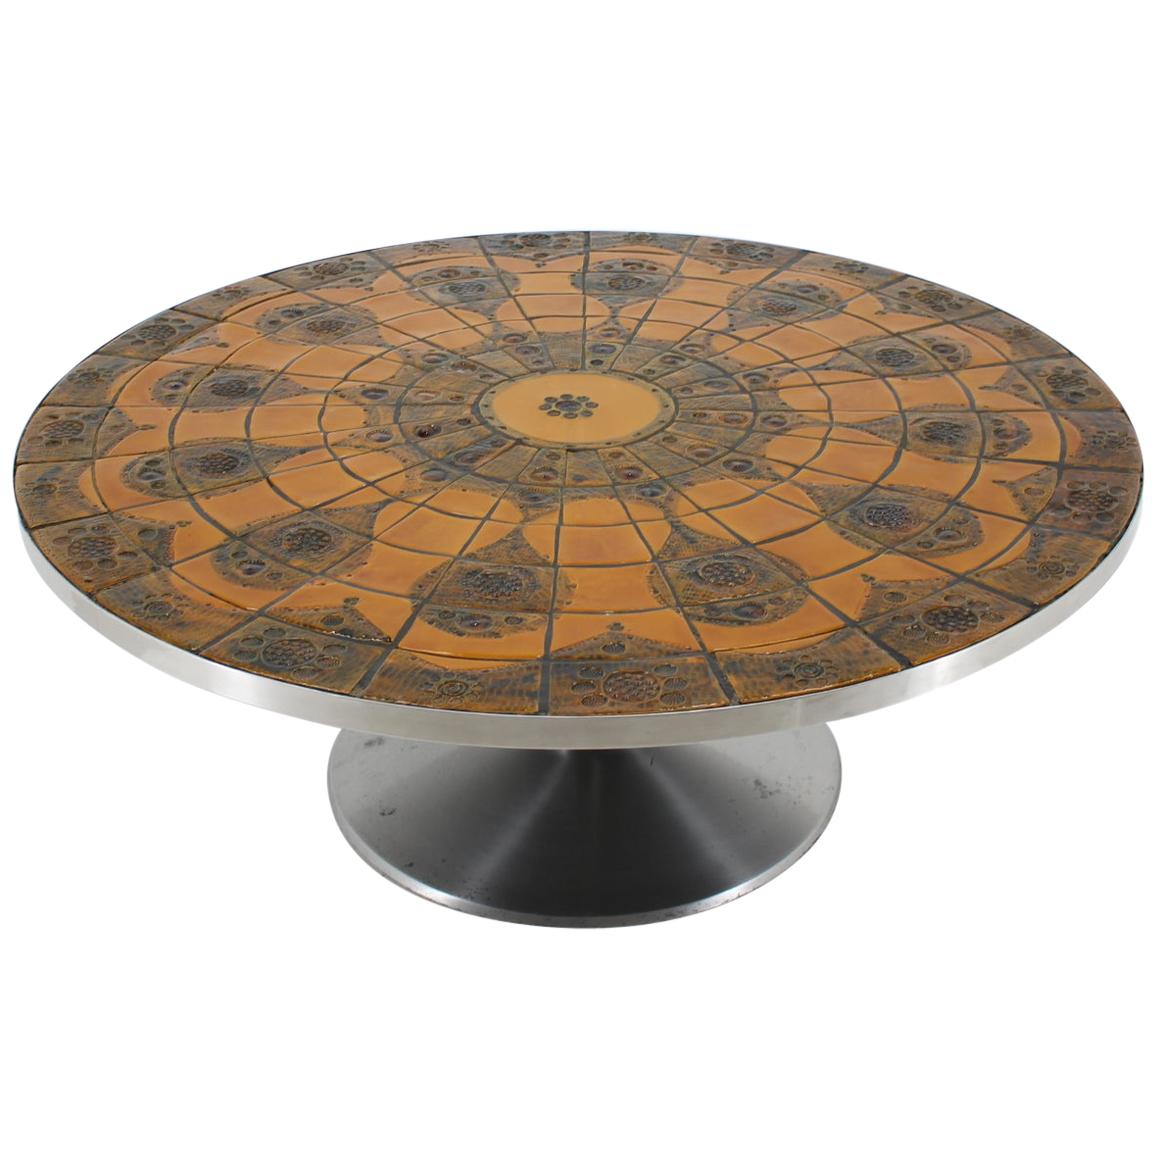 1960s Round Tile-Top Coffee Table by Lilly Just Lichtenberg for Poul Cadovius